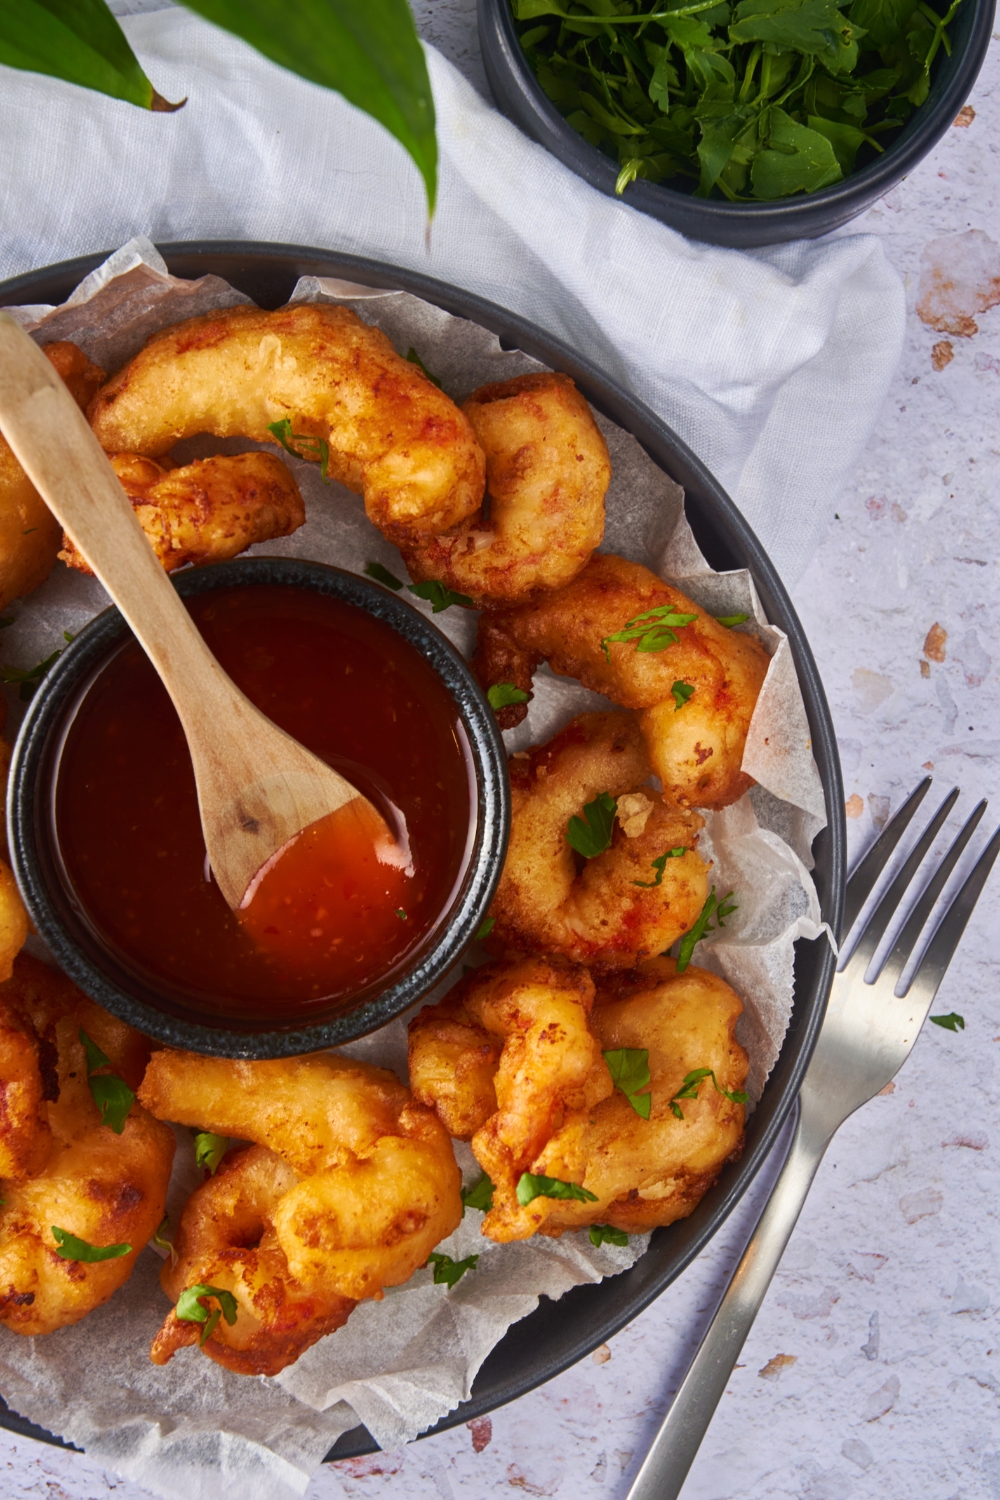 Close up of battered fried shrimp garnished with fresh herbs on a plate with a bowl of sweet and sour sauce.